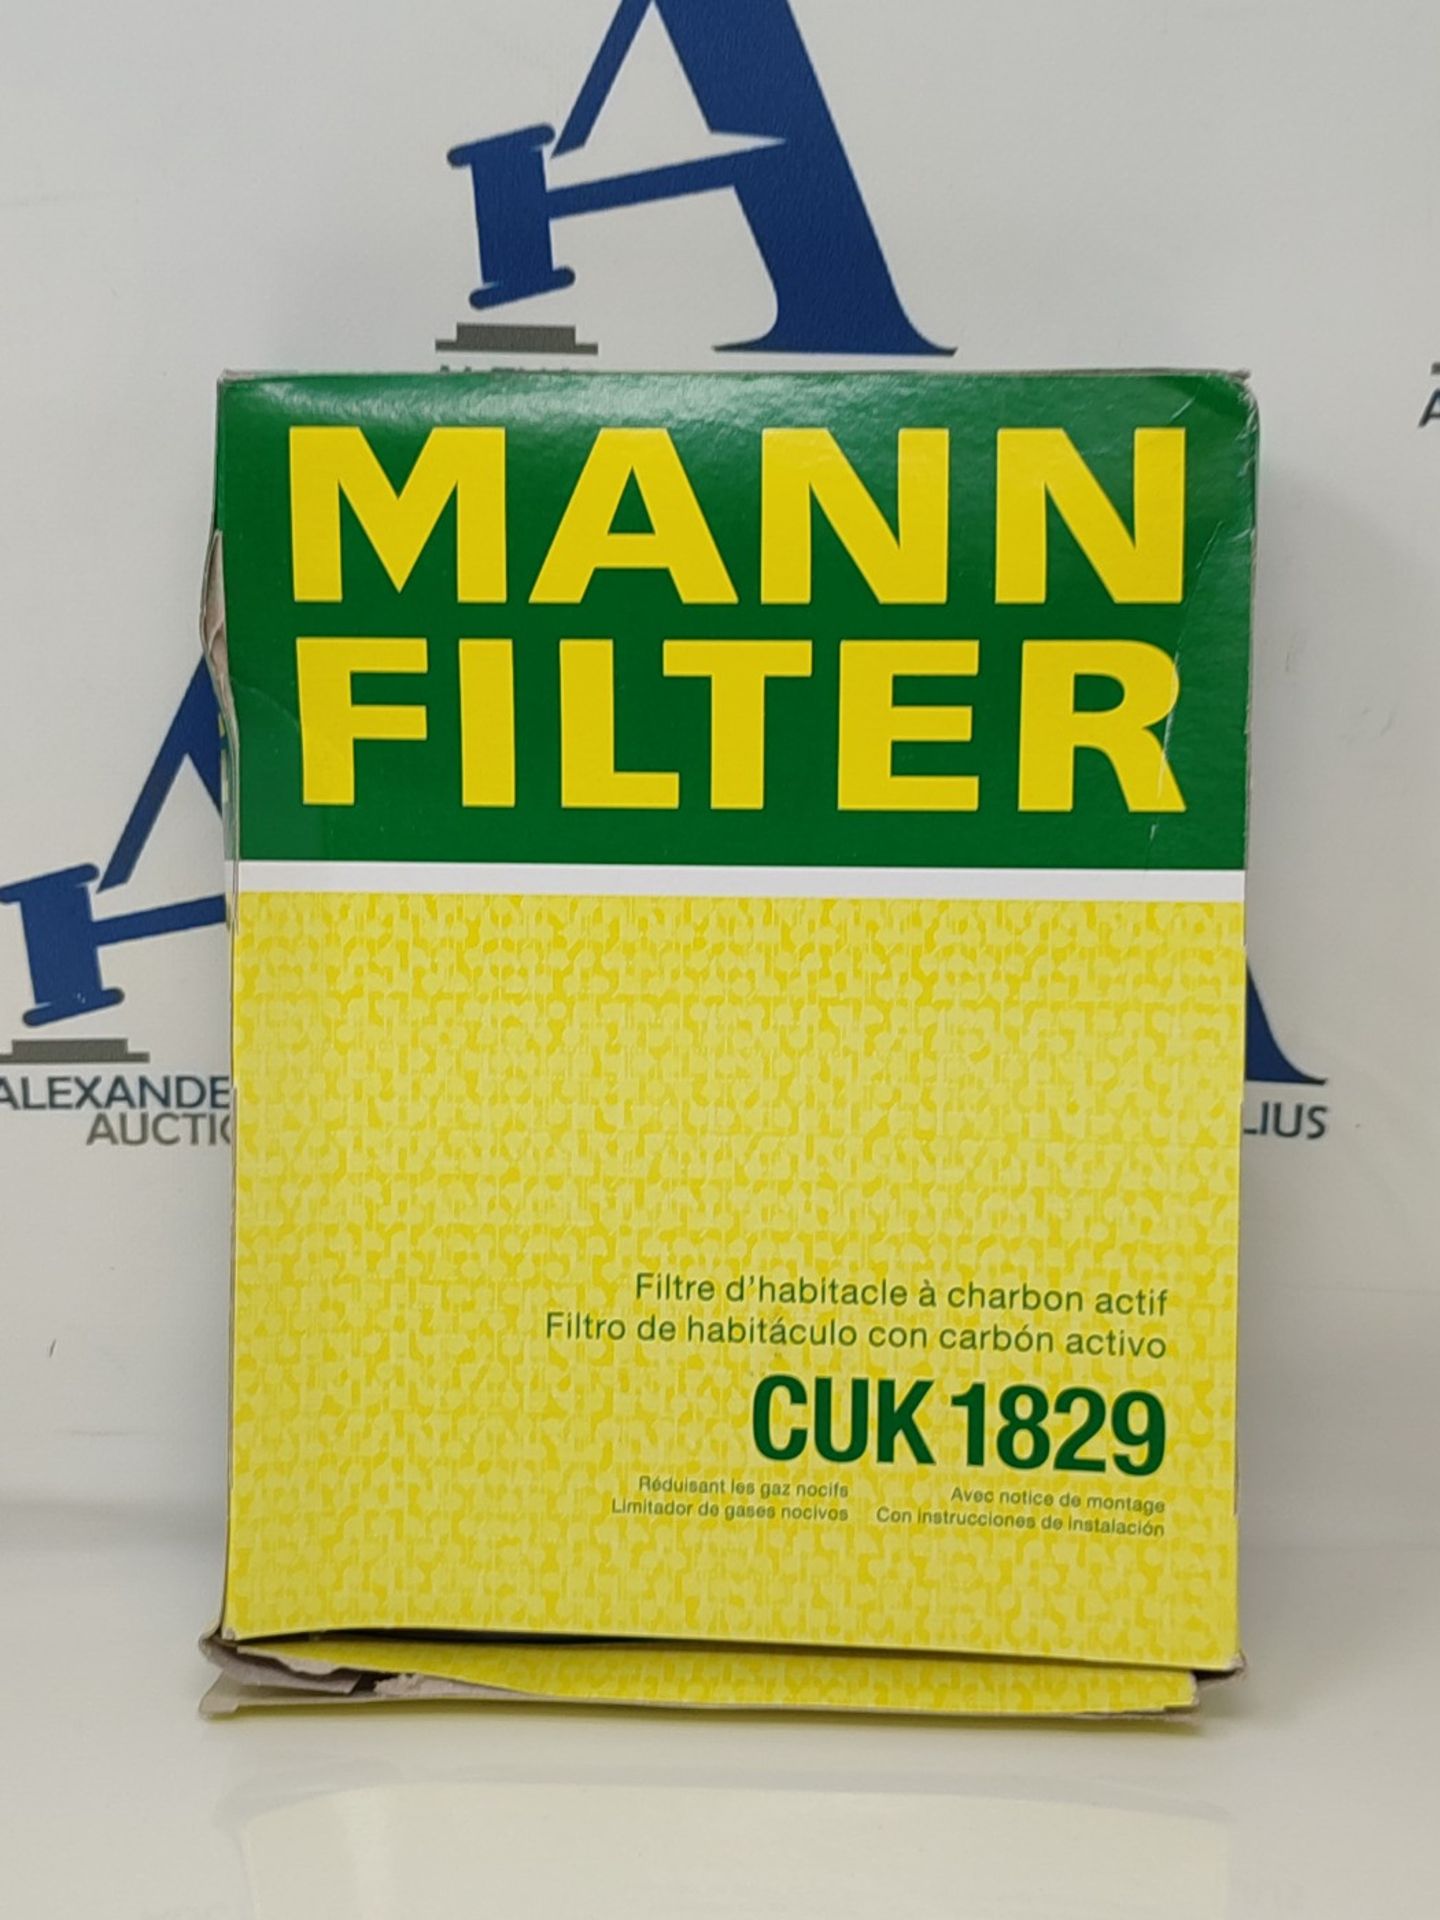 MANN-FILTER CUK 1829 Interior Filter - Pollen Filter with Activated Carbon - For Cars - Image 2 of 3